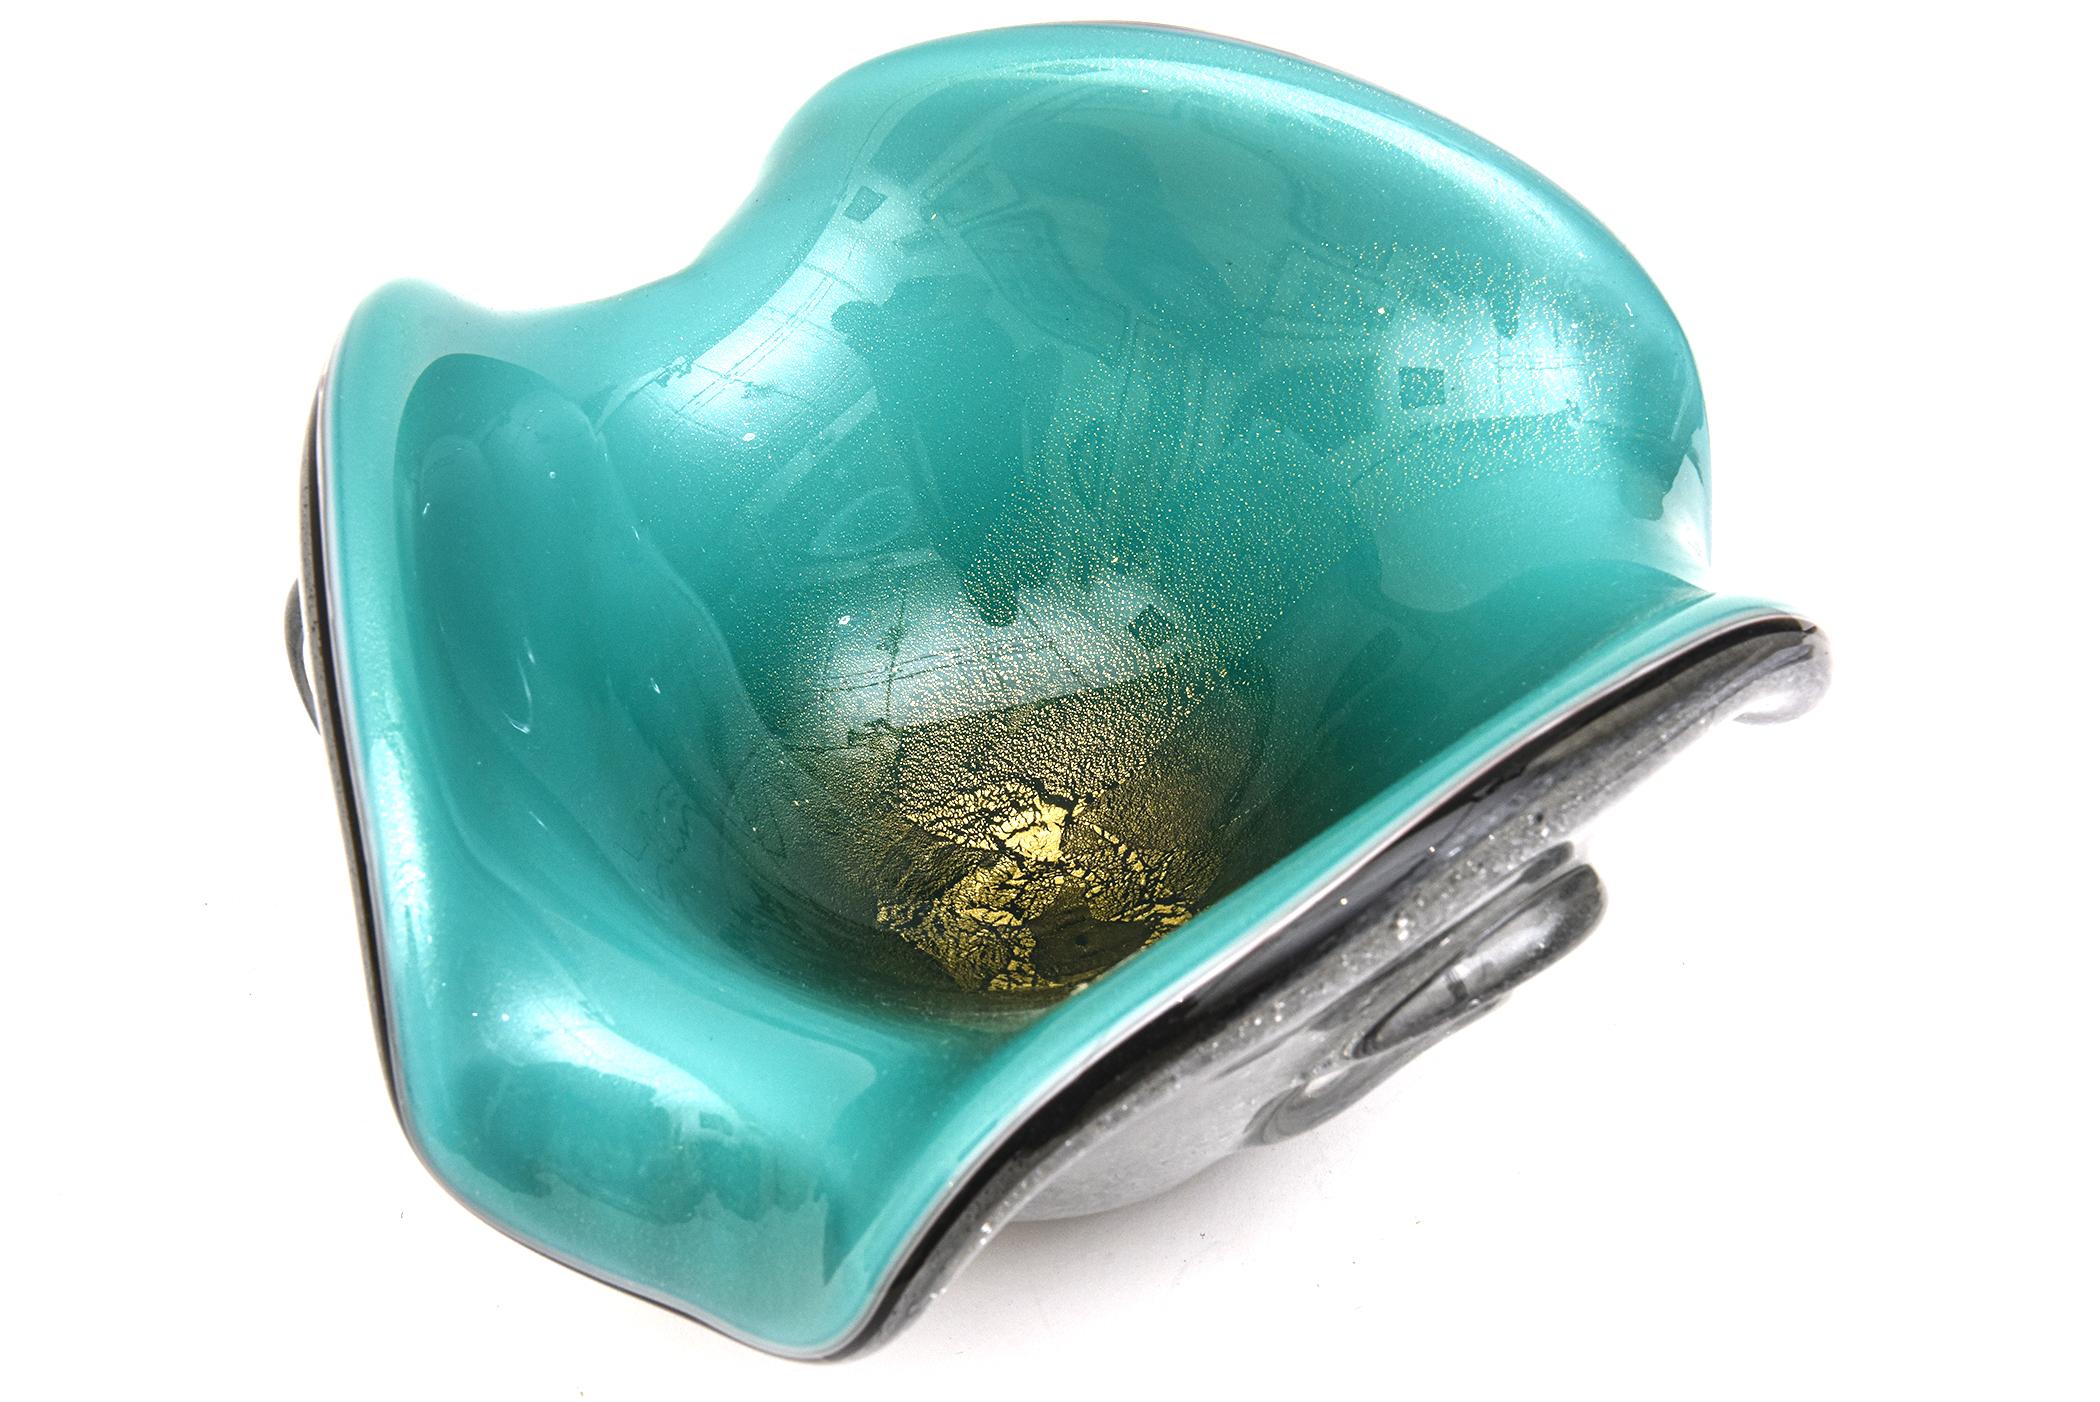 This substantial stunning and hard to find hand blown glass vintage Murano bowl is by Seguso Vetri d'Arte from the 50's. it is triple cased of glass layers with an abundance of bubbles noting the Pulegoso technique. There is still a partial original